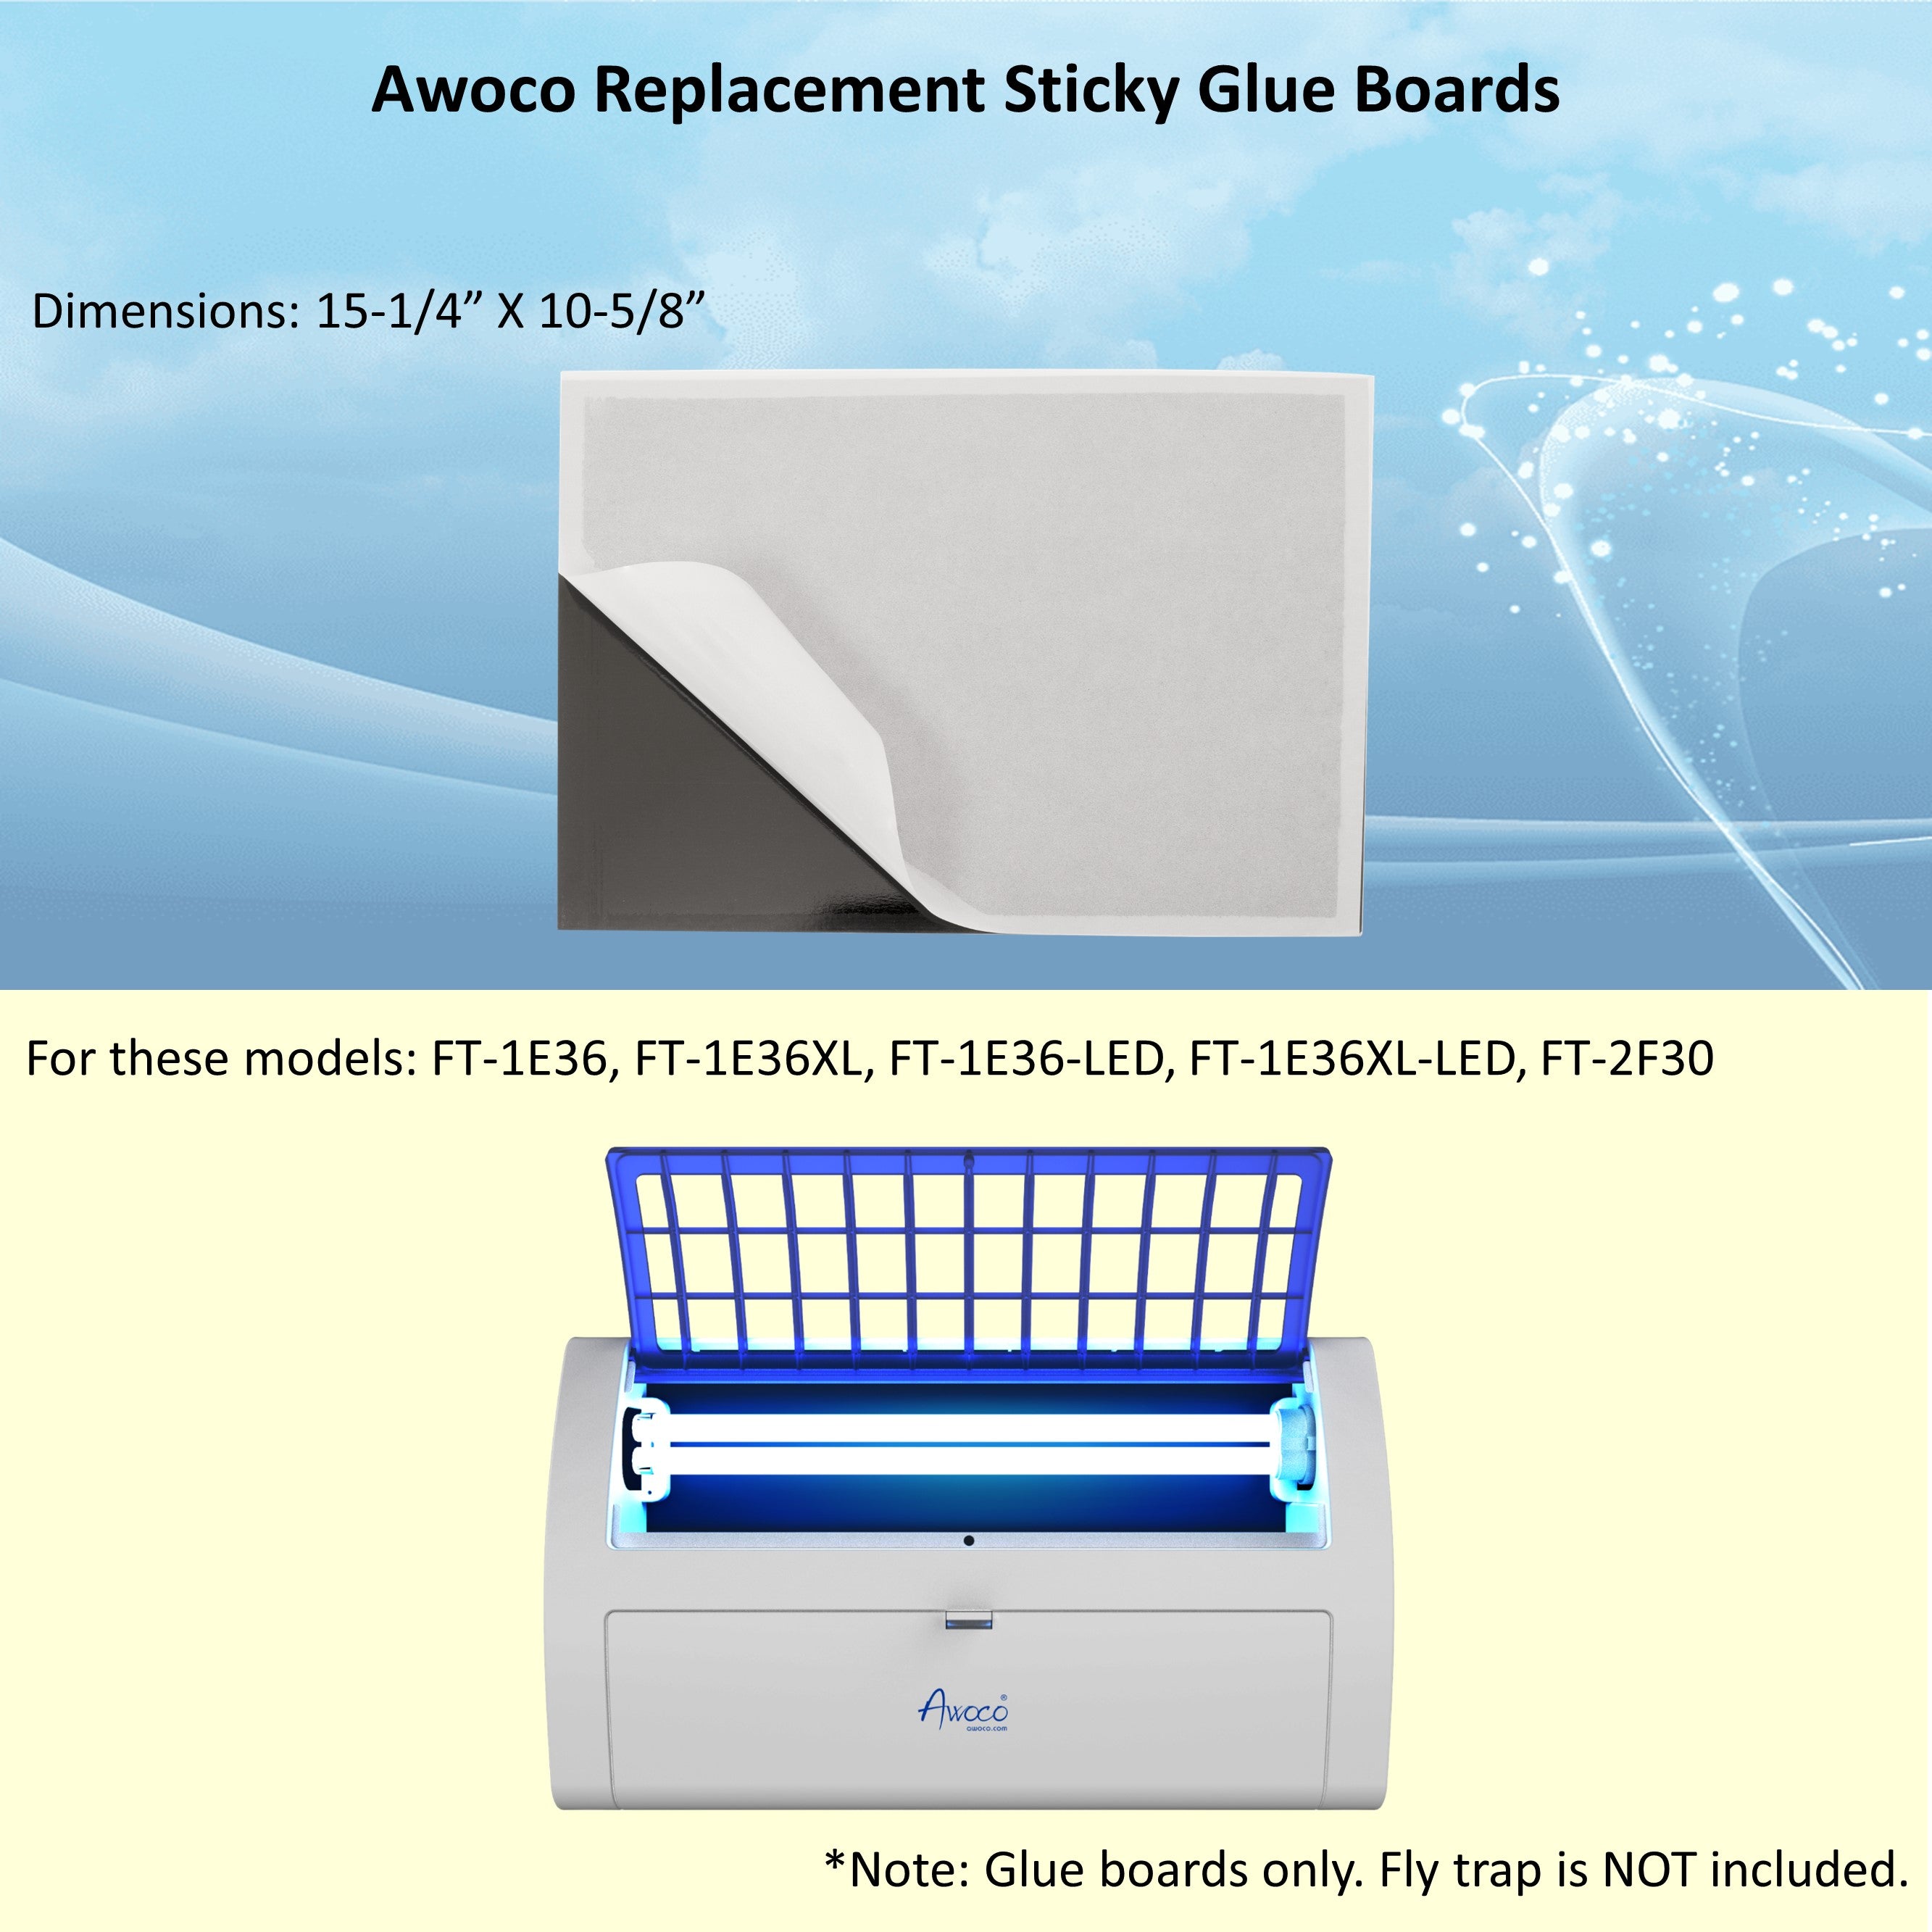 Awoco Pack of 5 Replacement Sticky Glue Boards for Wall Mount Sticky Fly Trap Lamp (5 Glue Boards for FT-1E36)